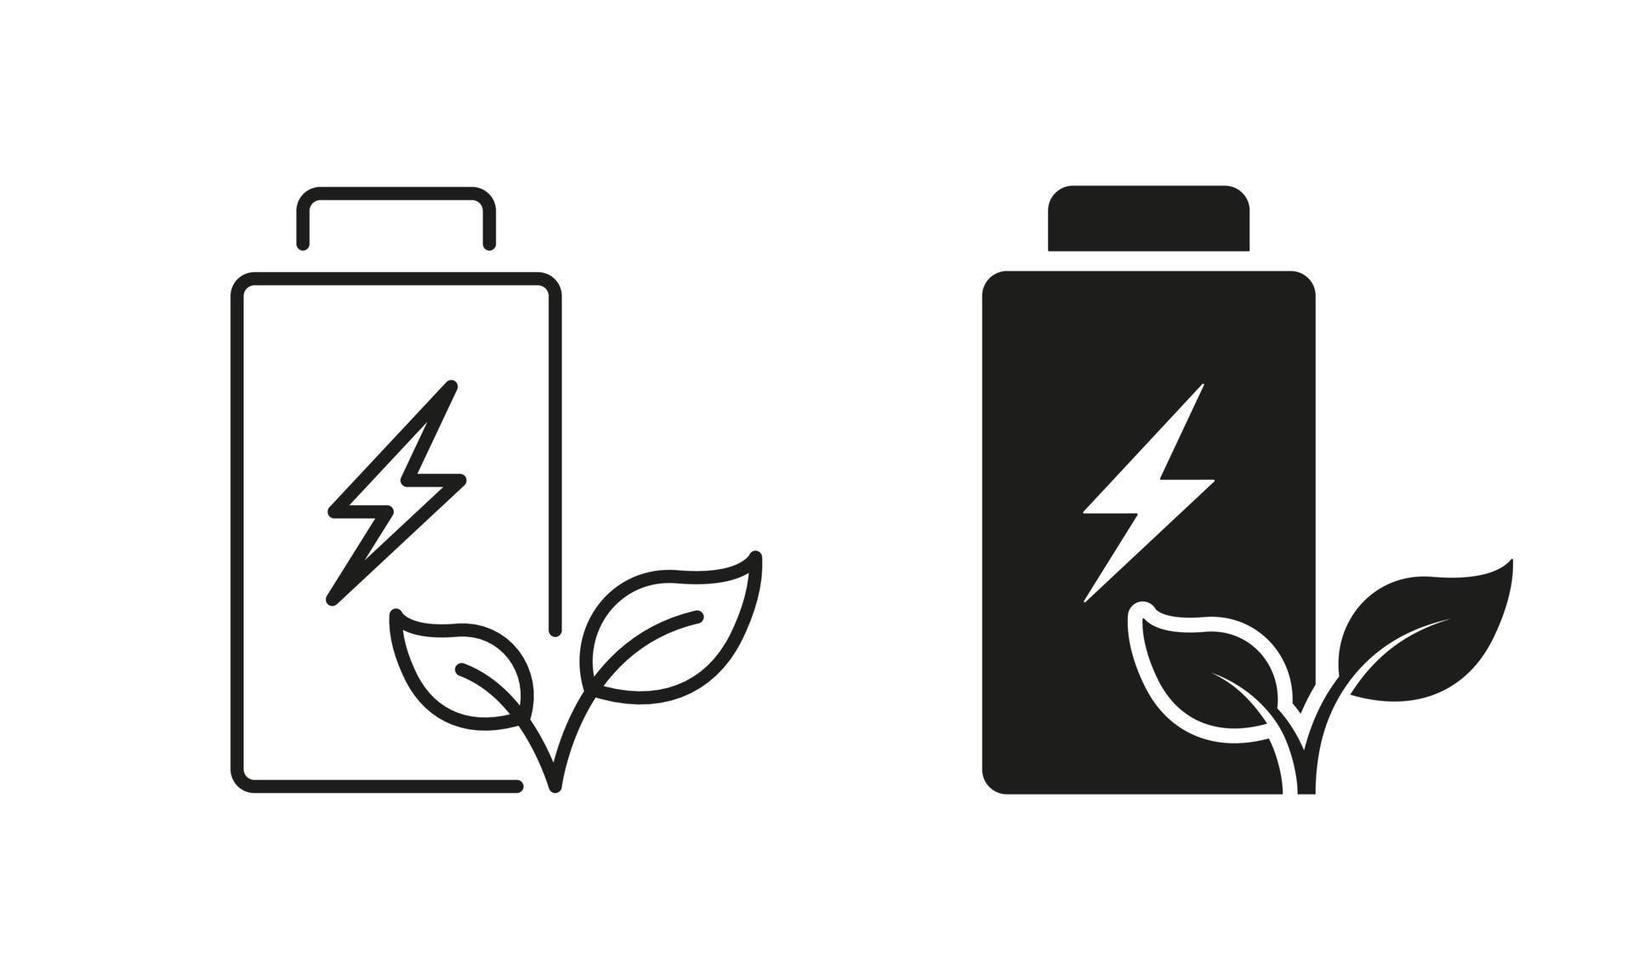 Rechargeable Accumulator with Leaf and Lightning Line and Silhouette Icon Set. Renewable Battery Pictogram. Eco Green Energy Symbol Collection on White Background. Isolated Vector Illustration.